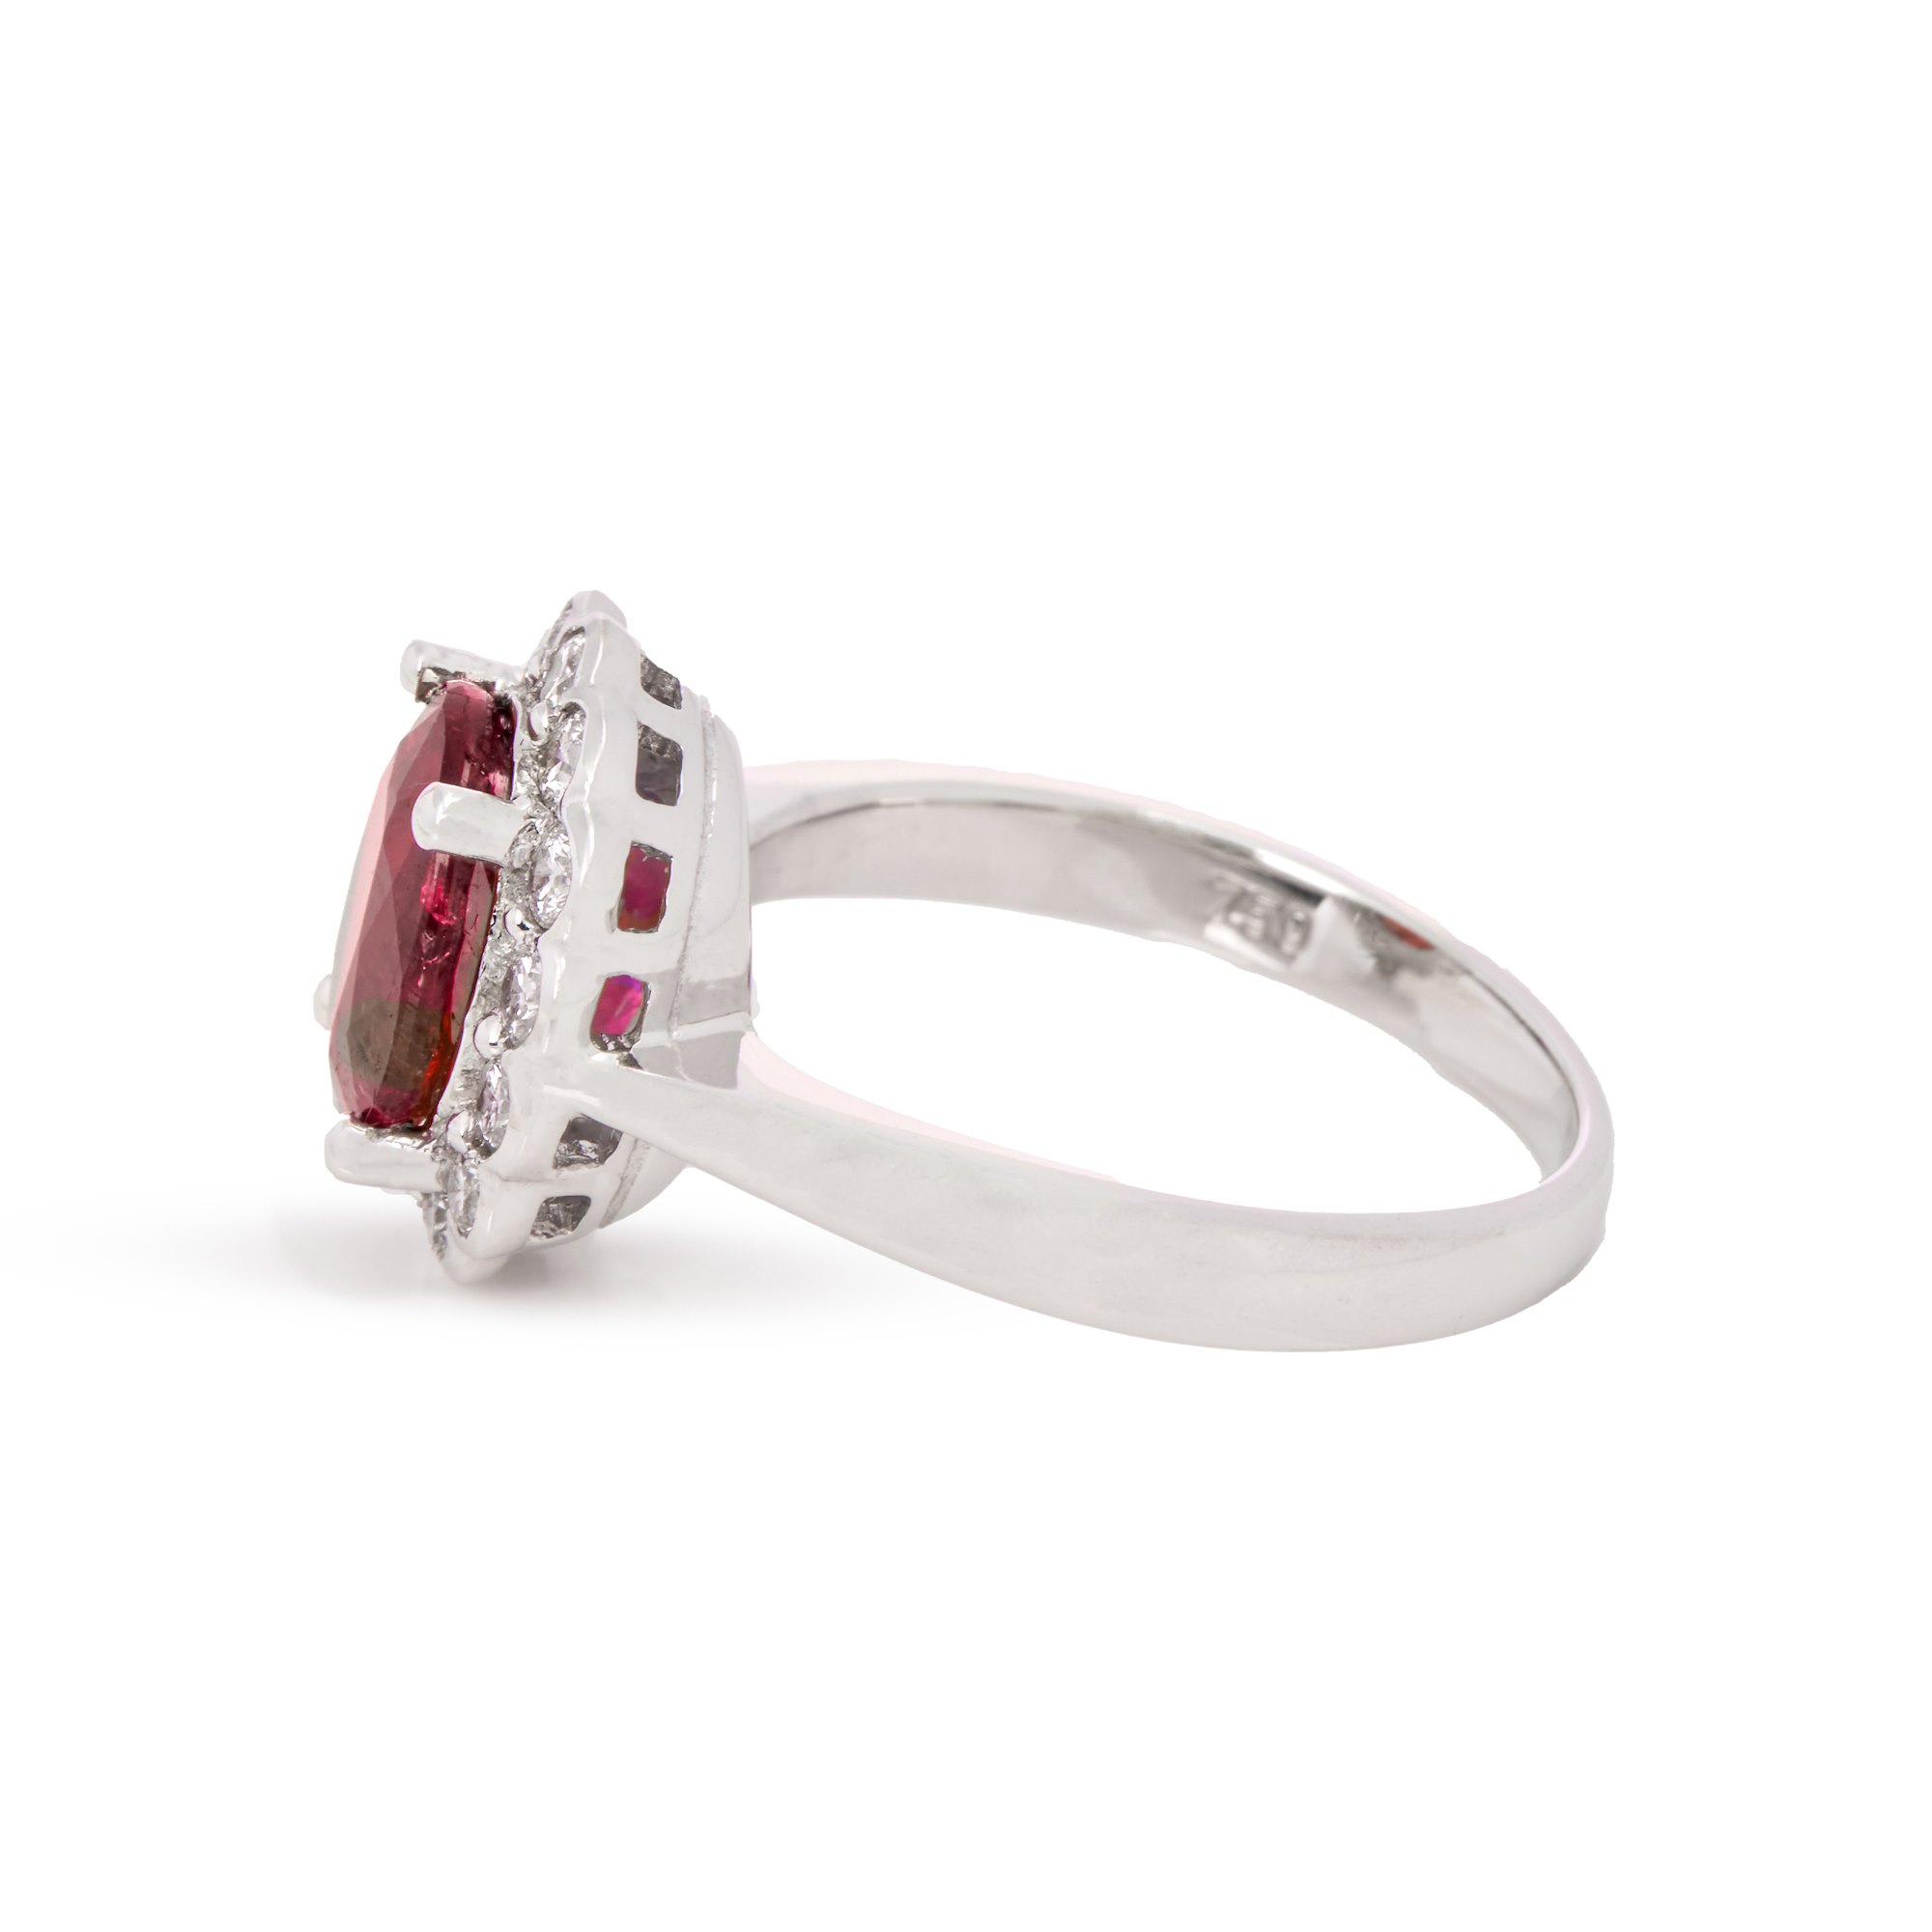 David Jerome Certified 2.16ct Oval Cut Ruby and Diamond Ring